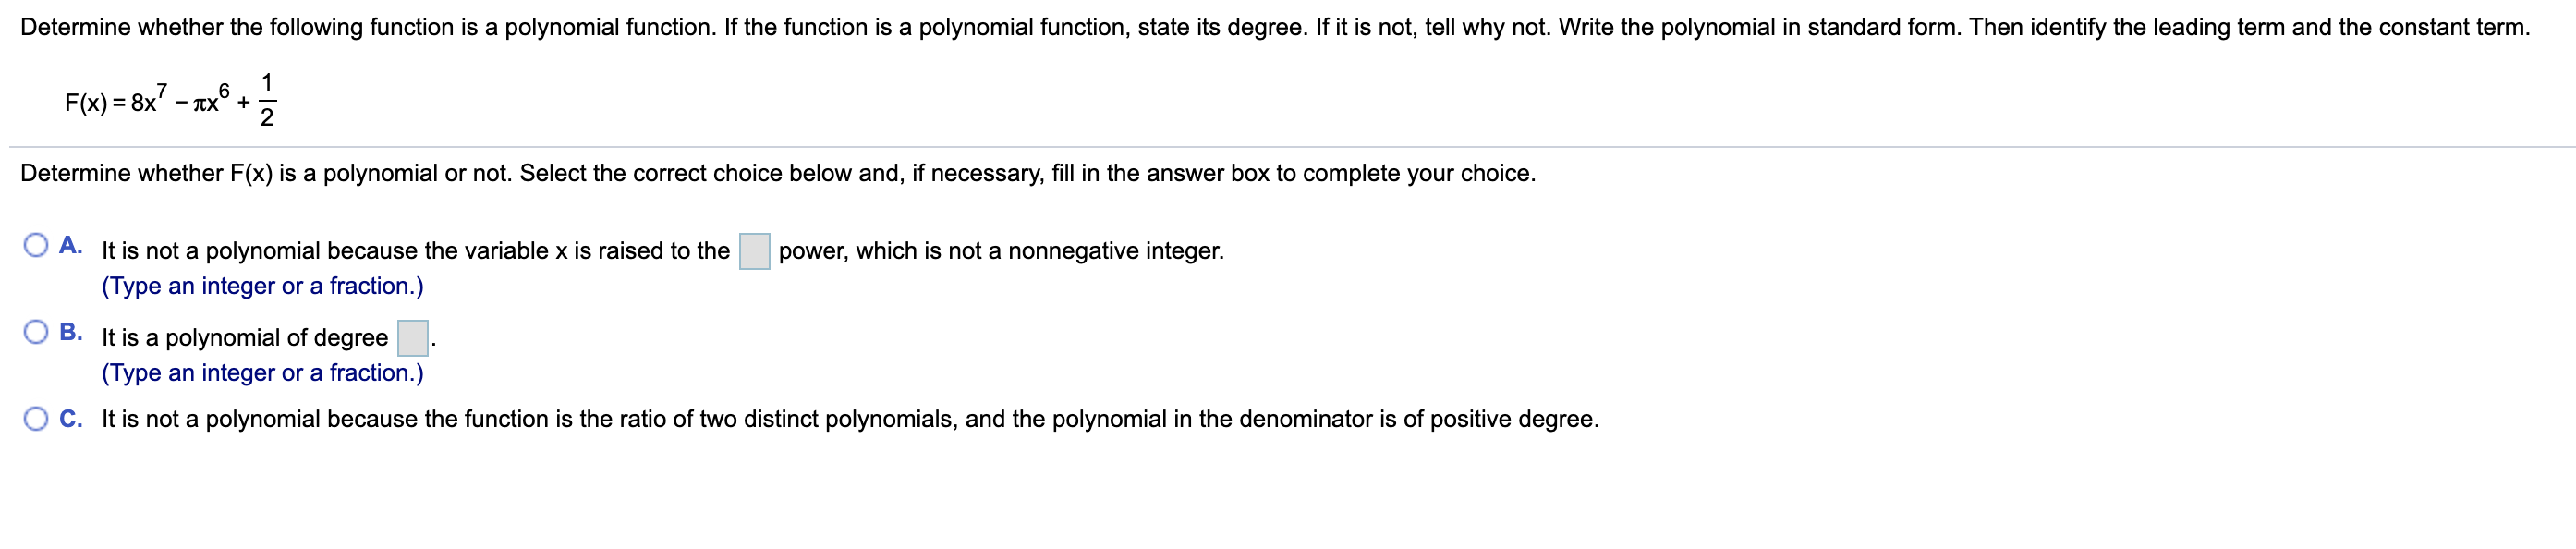 Determine whether the following function is a polynomial function. If the function is a polynomial function, state its degree. If it is not, tell why not. Write the polynomial in standard form. Then identify the leading term and the constant term.
F(x) = 8x' - Tx° +
Determine whether F(x) is a polynomial or not. Select the correct choice below and, if necessary, fill in the answer box to complete your choice.
A. It is not a polynomial because the variable x is raised to the
power, which is not a nonnegative integer.
(Type an integer or a fraction.)
O B. It is a polynomial of degree
(Type an integer or a fraction.)
O c. It is not a polynomial because the function is the ratio of two distinct polynomials, and the polynomial in the denominator is of positive degree.
